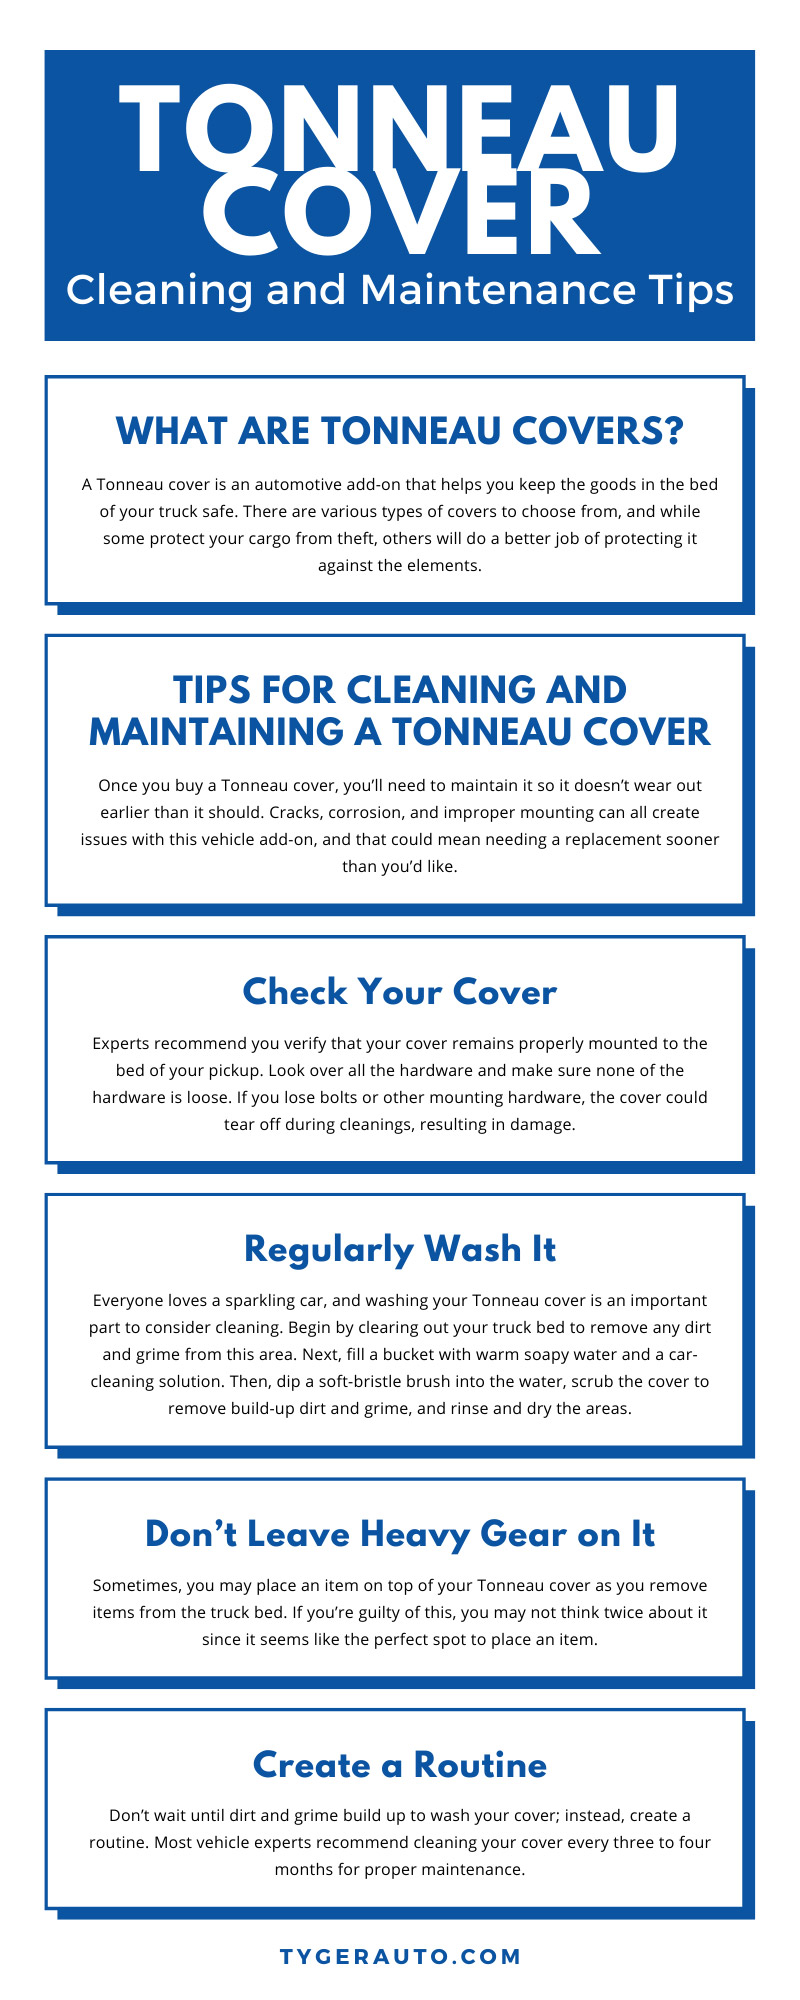 Tonneau Cover Cleaning and Maintenance Tips